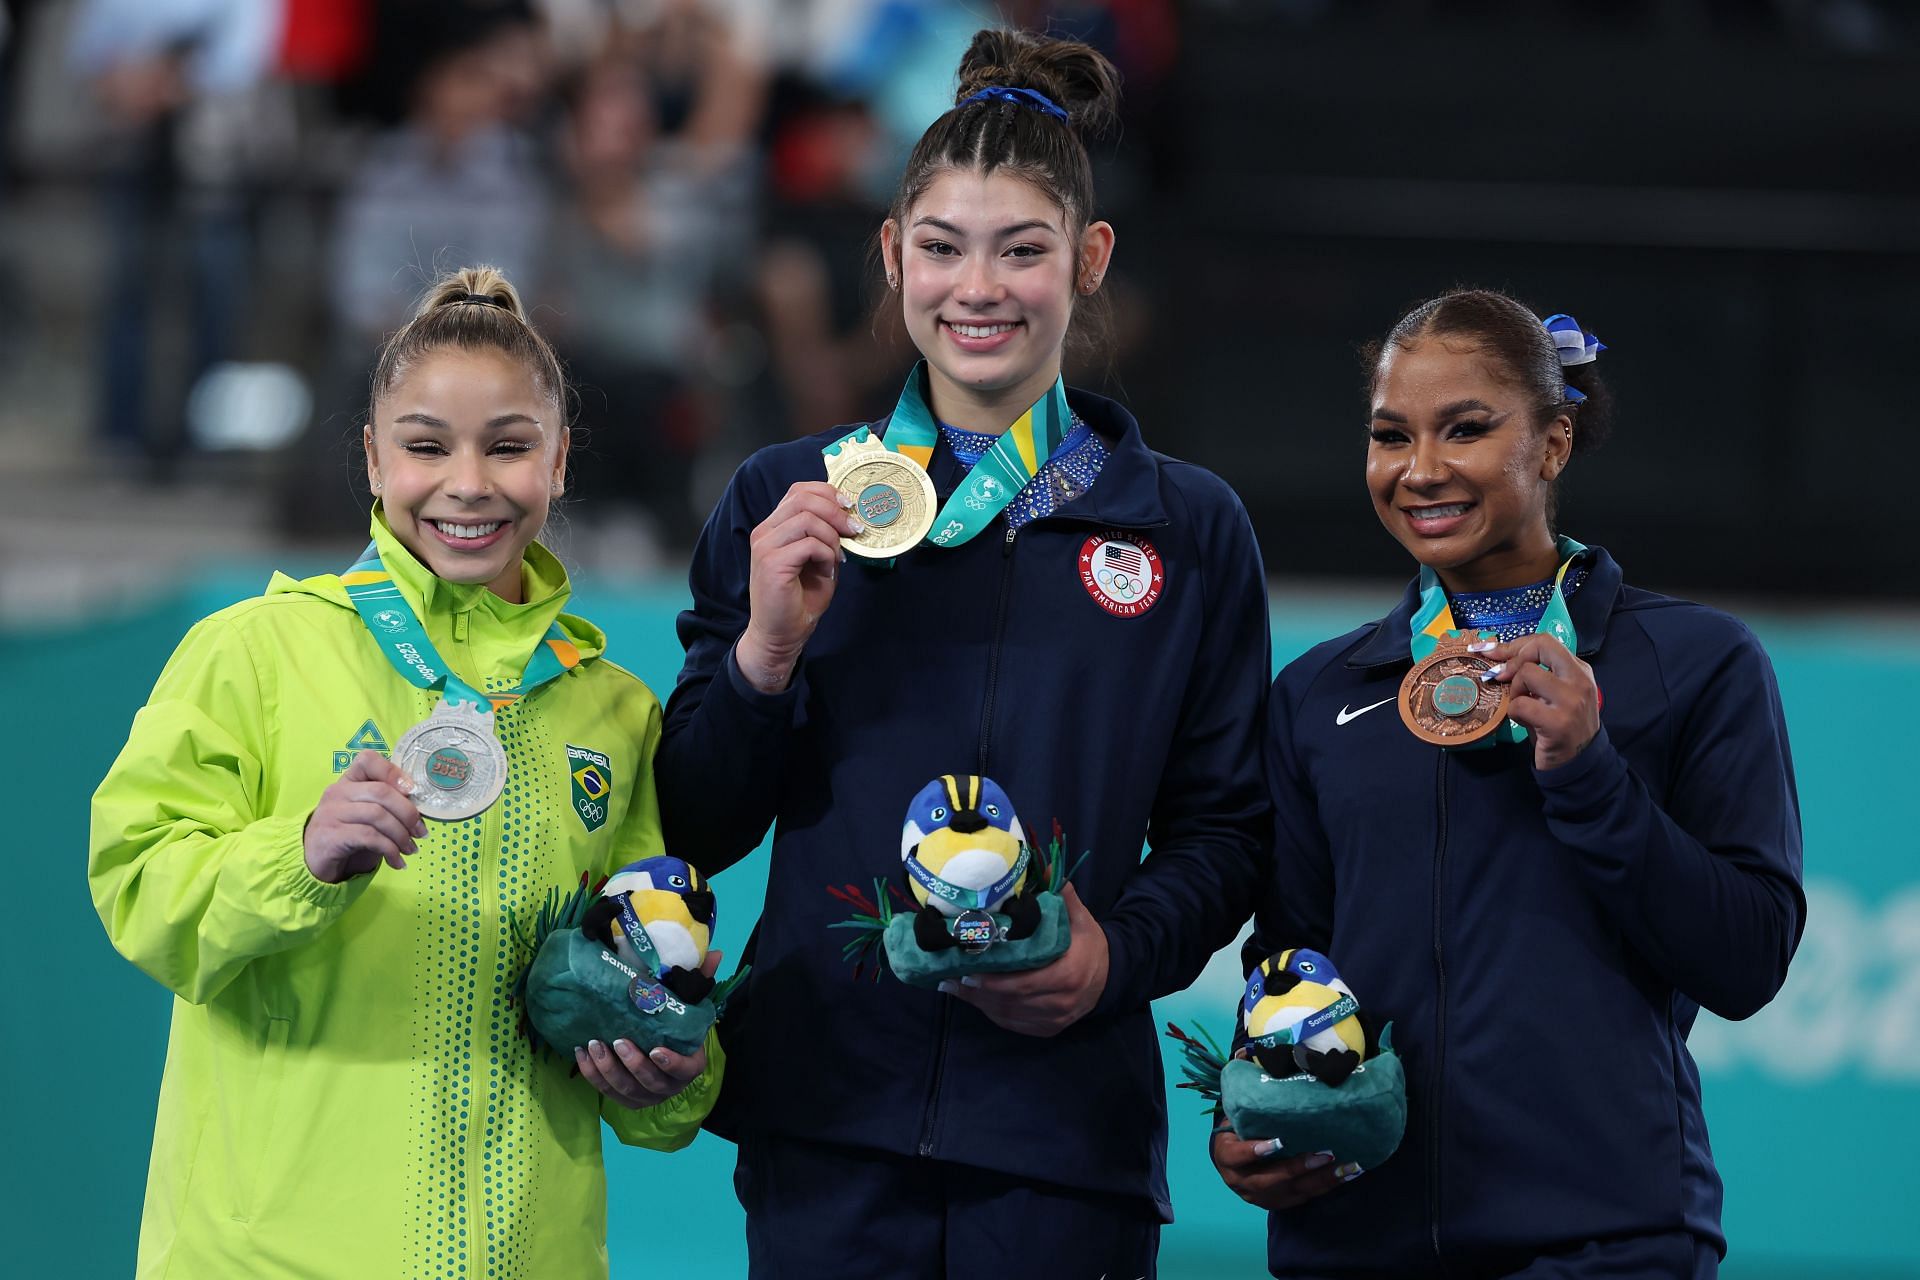 Flavia Saraiva (L), Kayla DiCello (C) and Jordan Chiles (R) in the Gymnastics - Women&#039;s All-Around at Santiago 2023 Pan Am Games. (Photo by Al Bello/Getty Images)